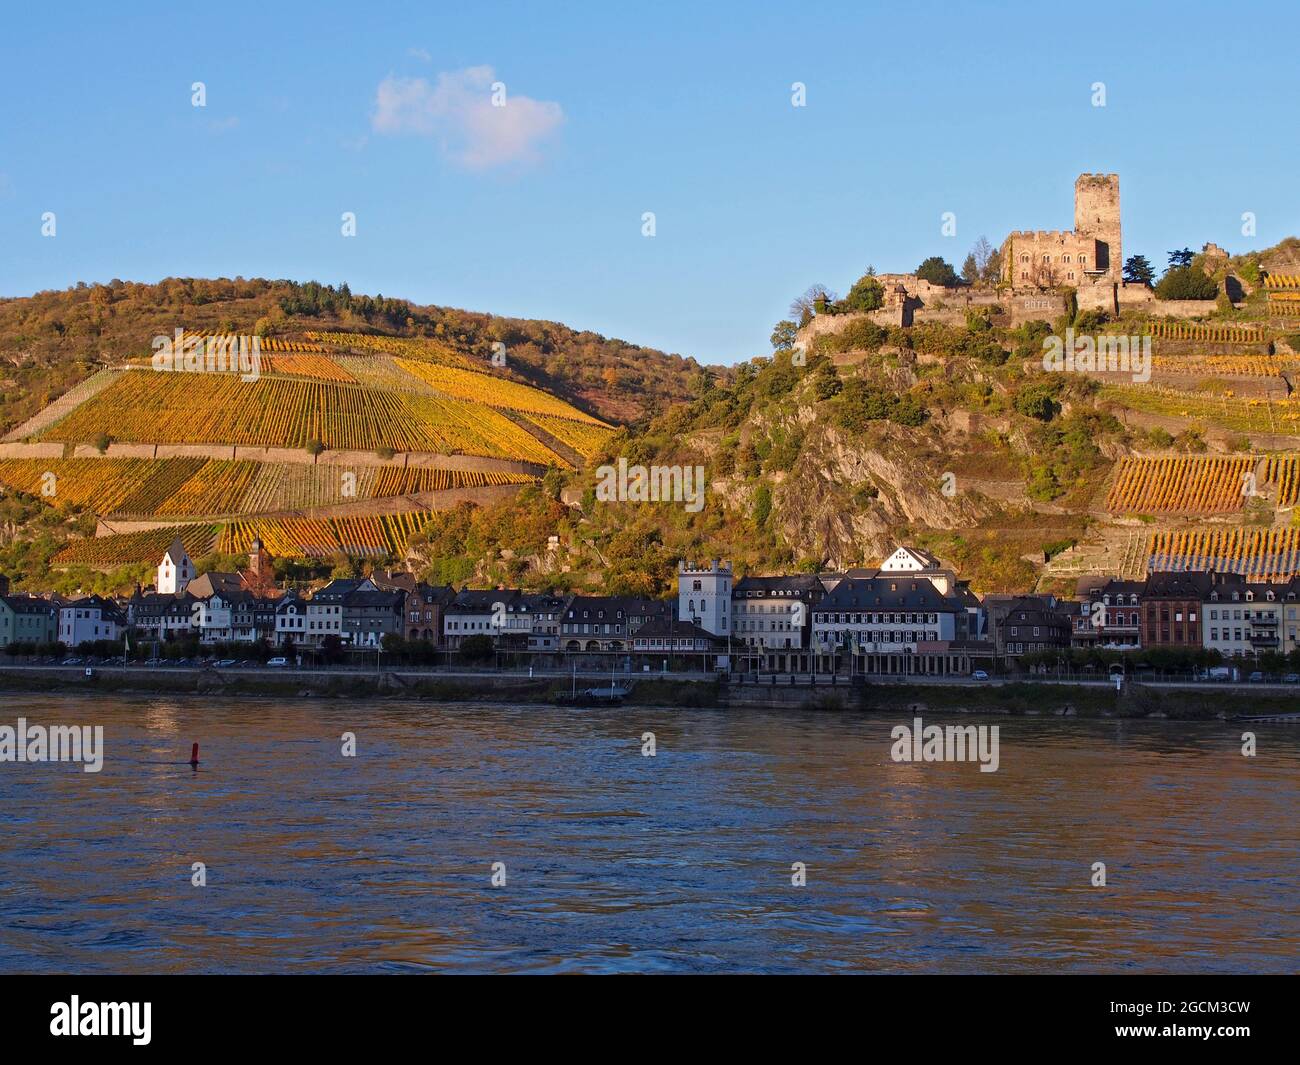 Pfalzgrafenstein Castle on the Rhine River in Germany taken from cruise ship Stock Photo